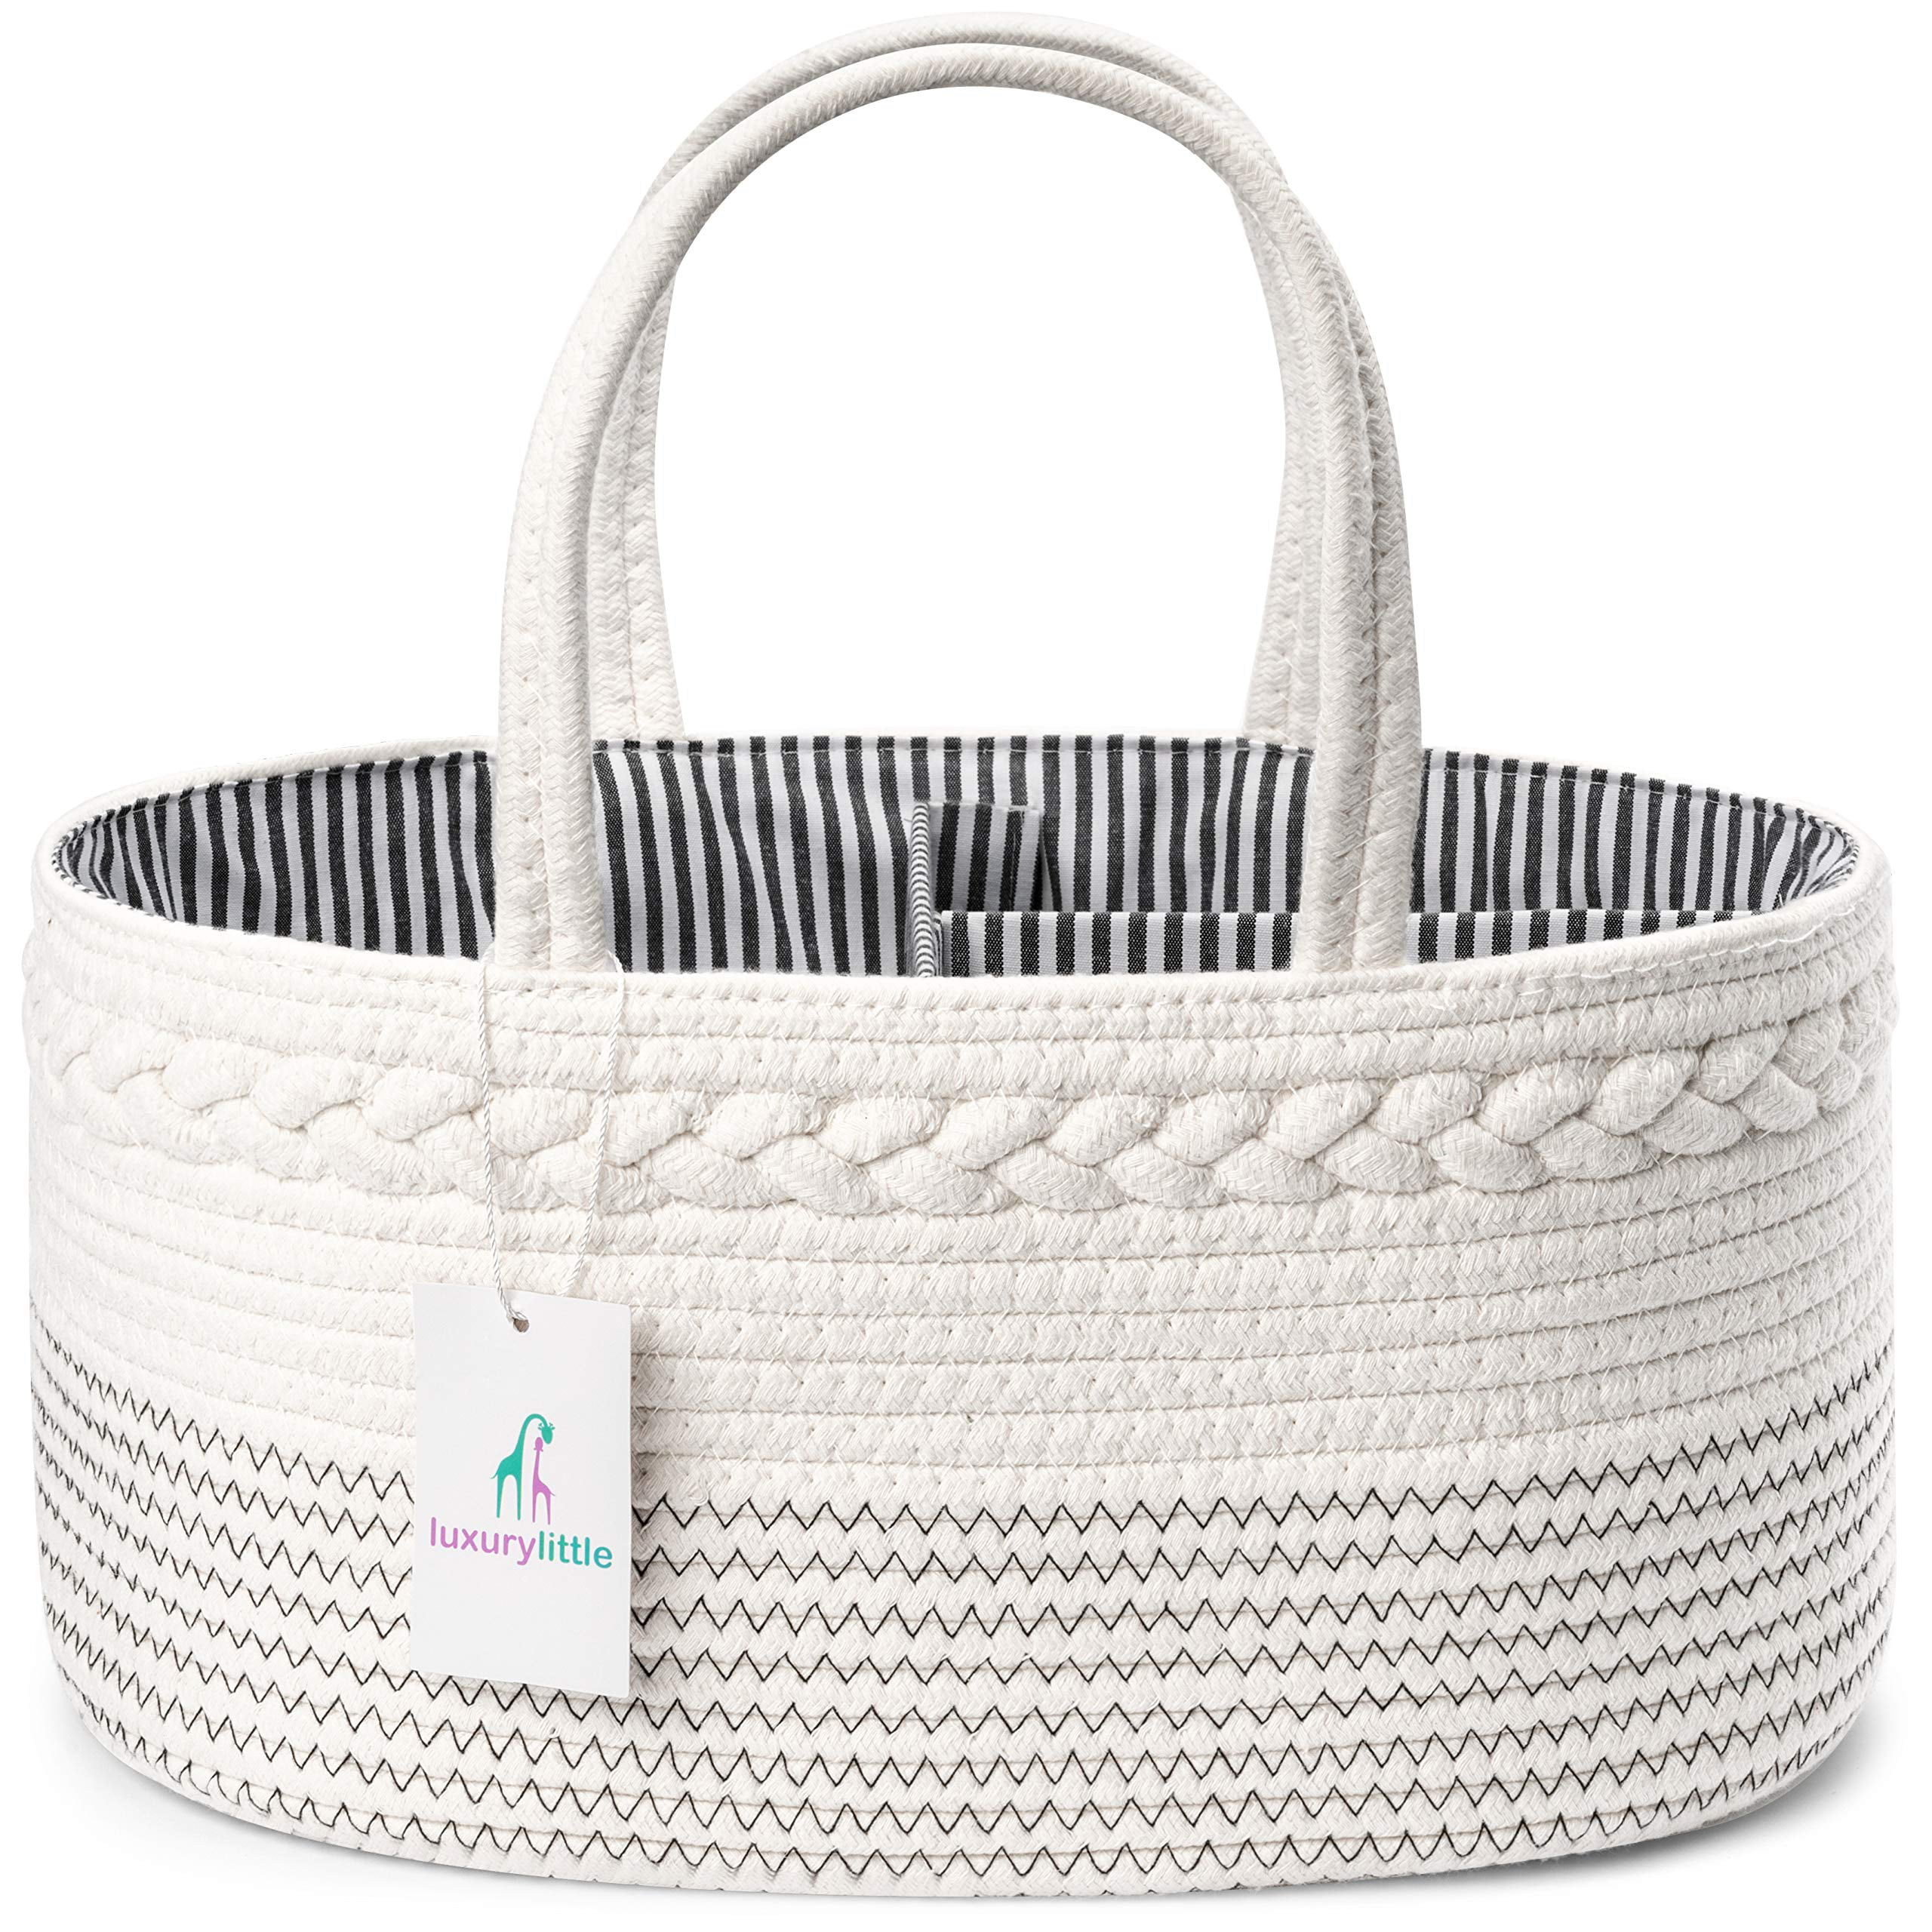 Luxury Little Baby Diaper Basket Blue + white A must-have baby storage bag for mothers 100% Nature Cotton Rope Nursery Storage Bin Newborn Registry Must Haves Baby Diaper Caddy Organizer Rope Nursery Storage Bin for Boys and Girls 